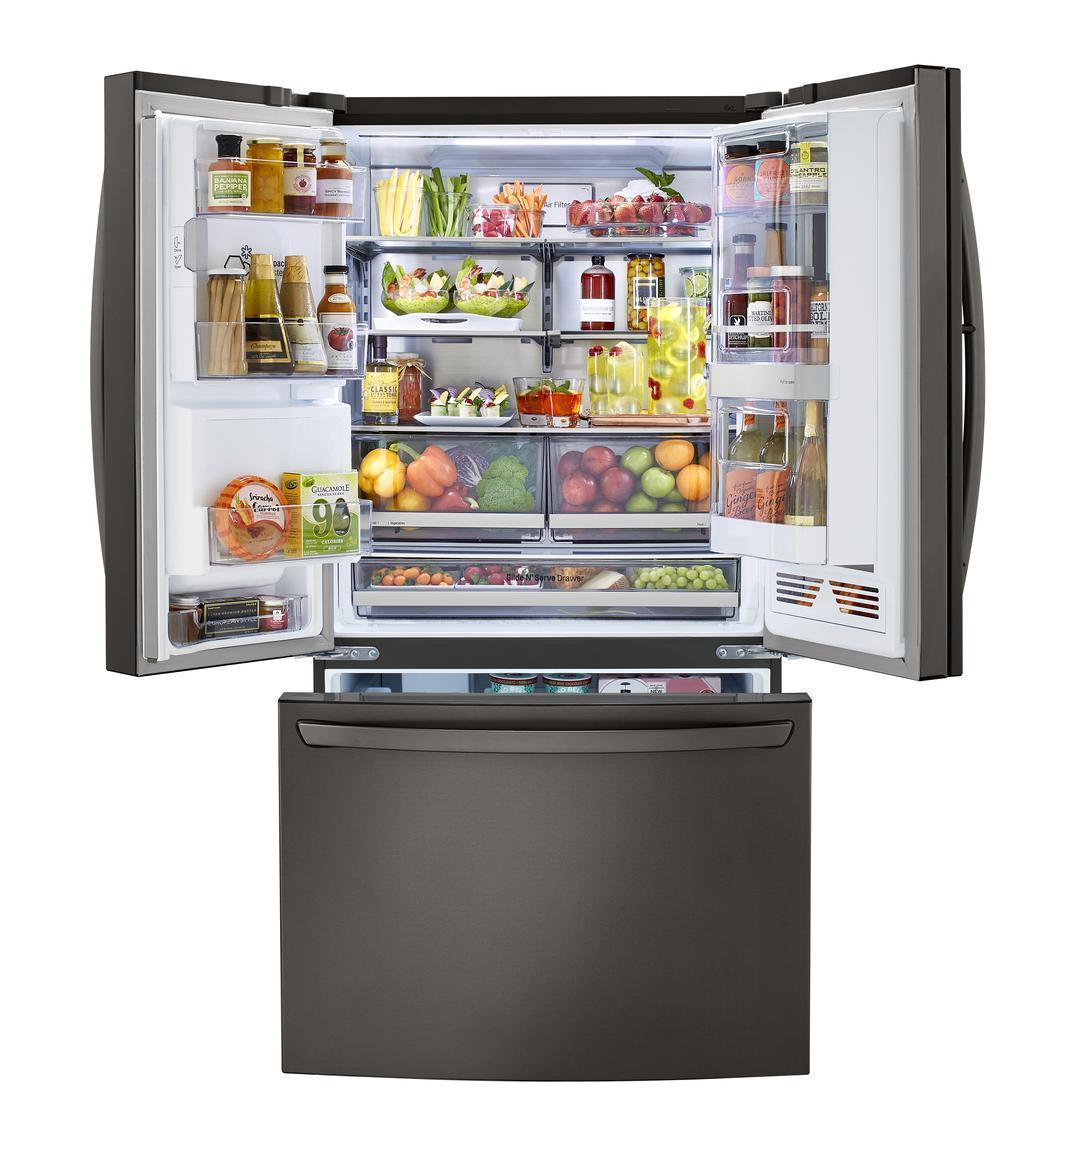 LG - 35.8 Inch 23.5 cu. ft French Door Refrigerator in Black Stainless - LRFVC2406D